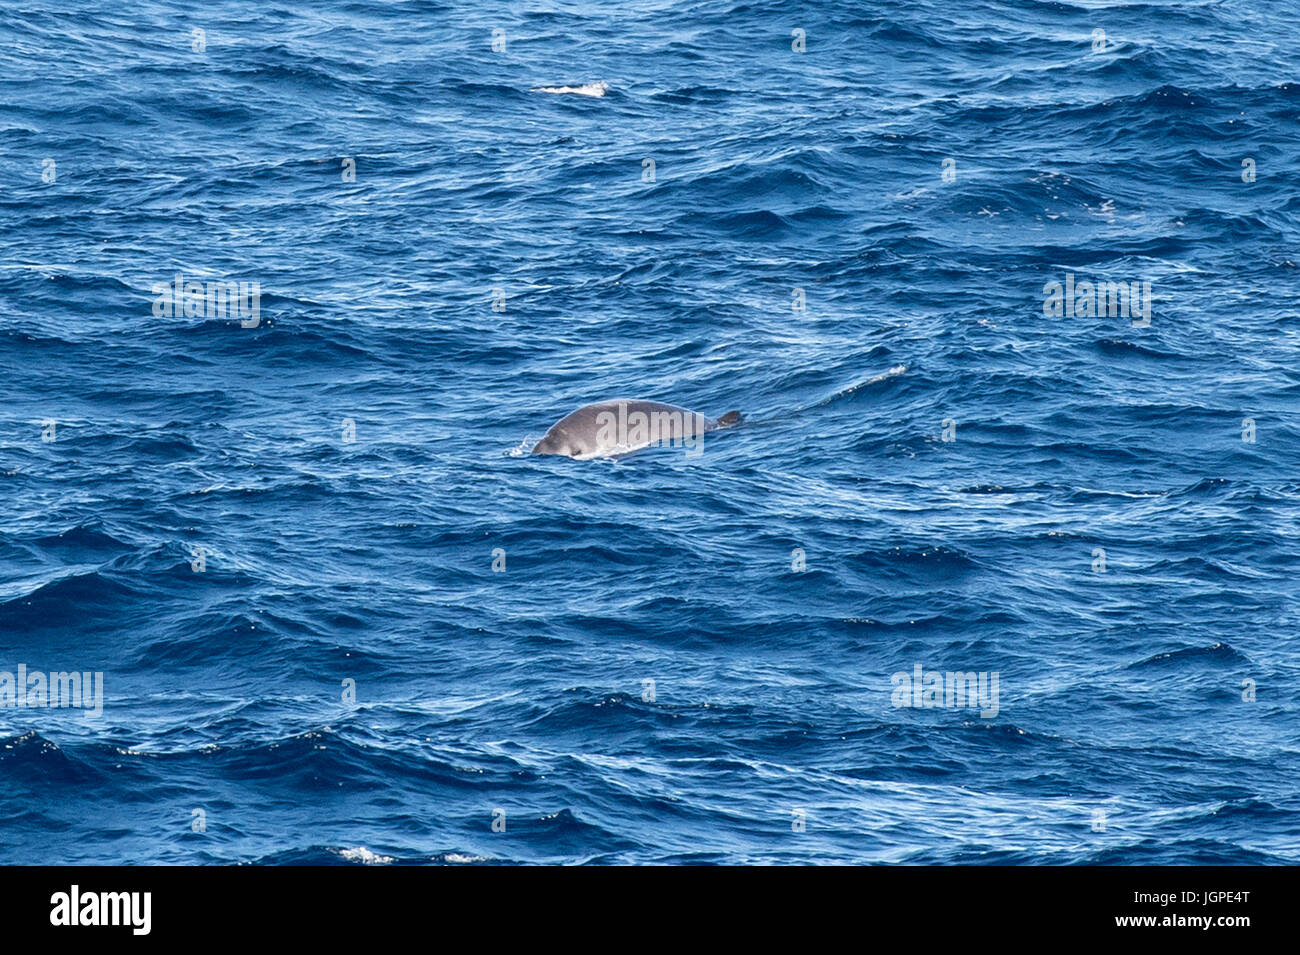 Adult Gervais' beaked whale, Mesoplodon europaeus, surfacing, several hundred miles off Portugal, Atlantic Ocean Stock Photo